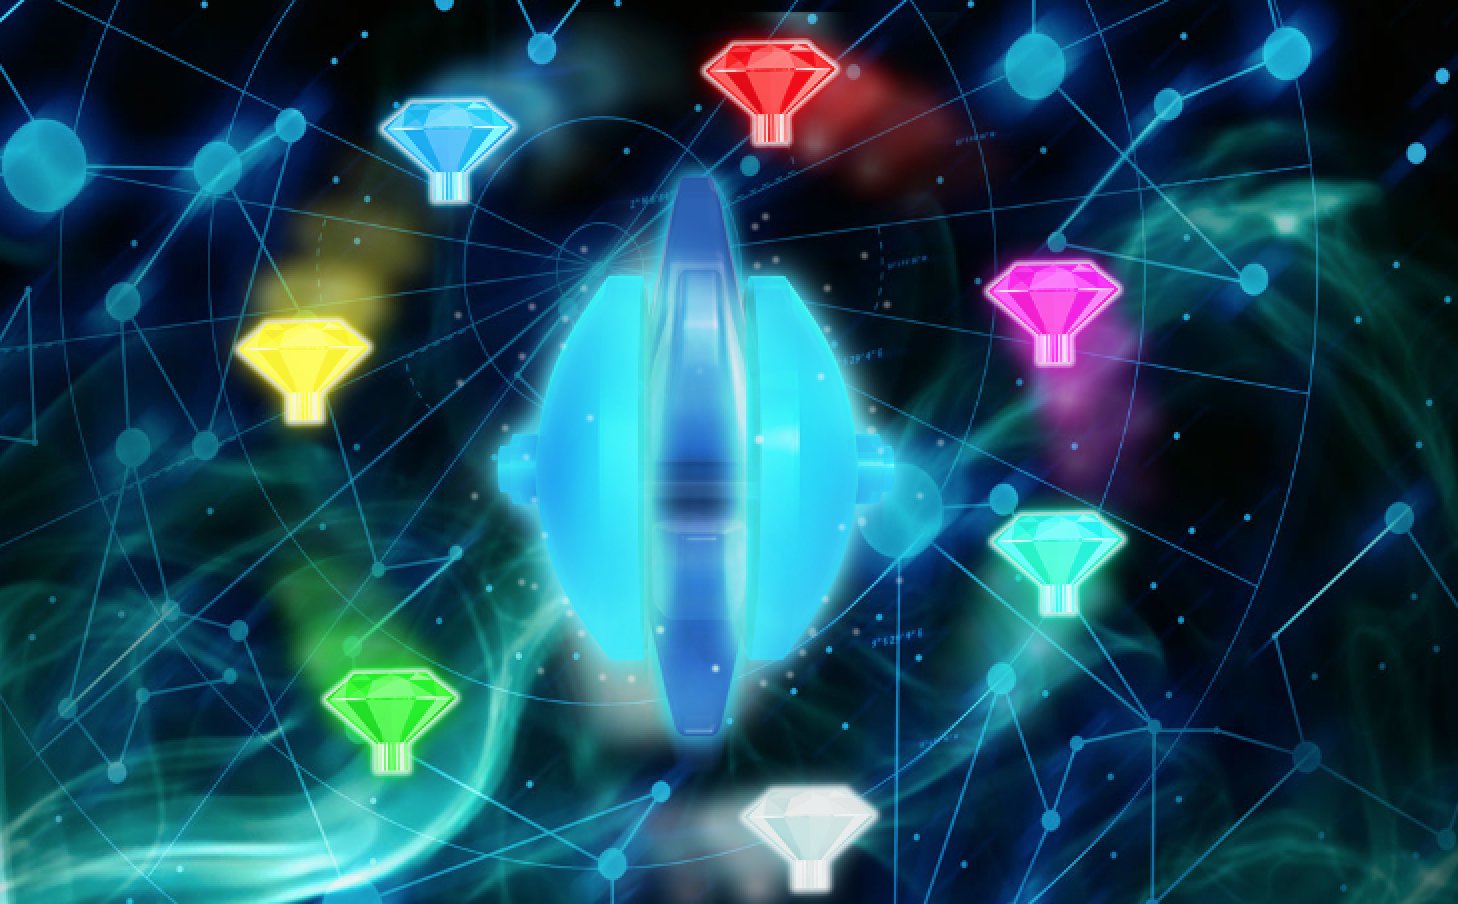 Nibroc Rock Are Those Lego Chaos Emeralds